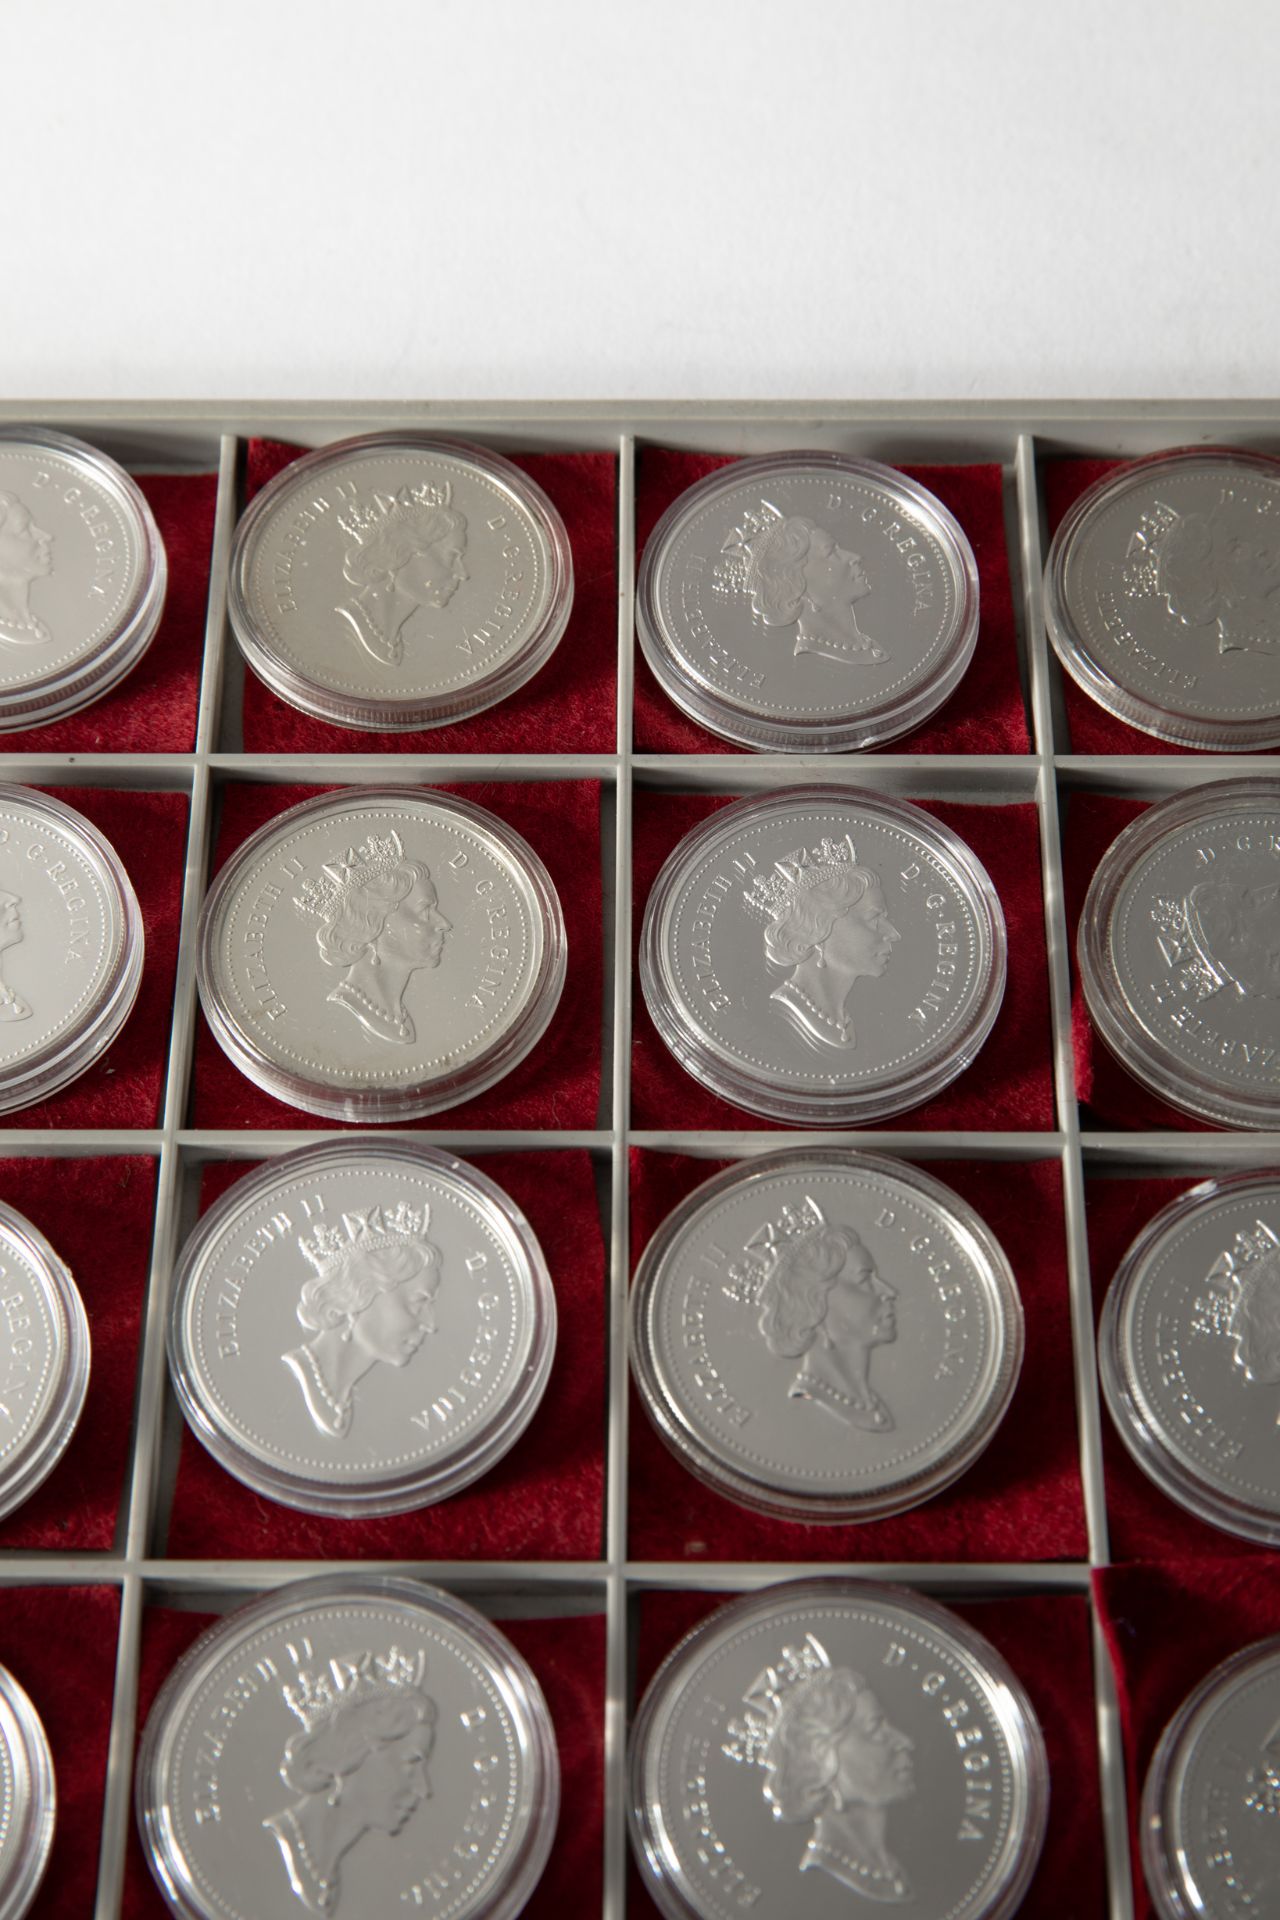 89 silver dollars Canada, 1949-2019 - Image 32 of 37